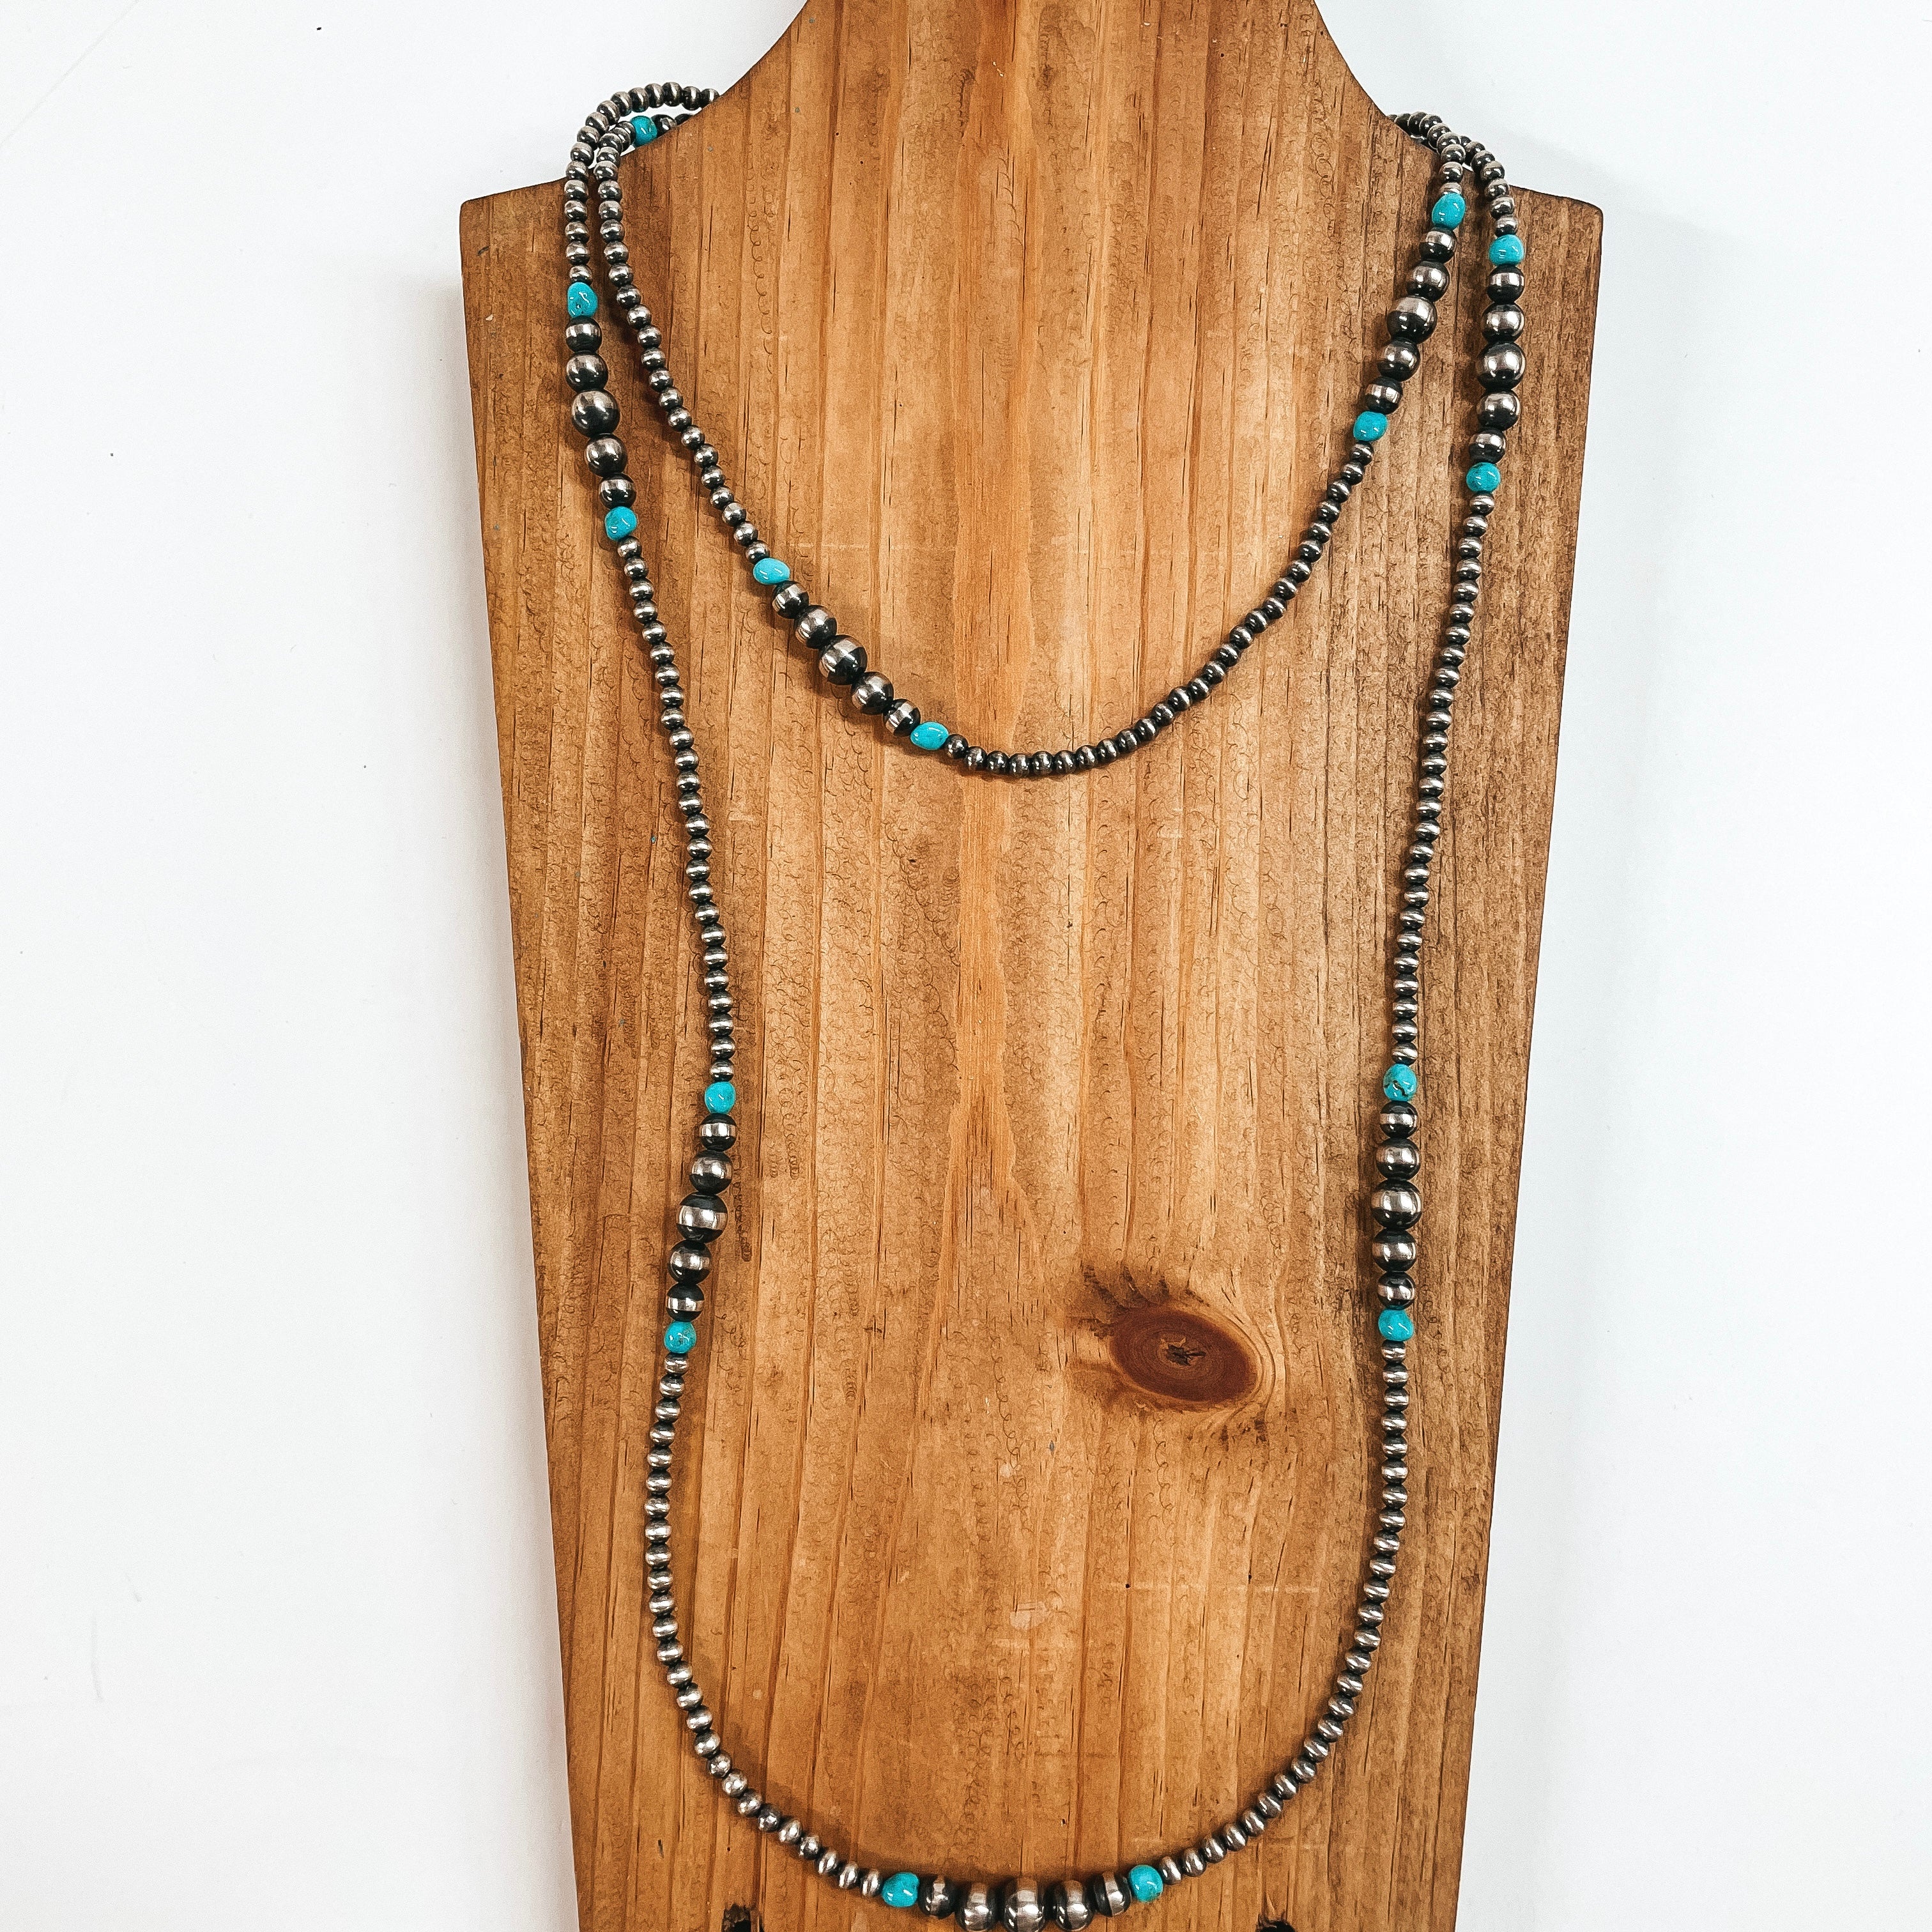 Navajo | Navajo Handmade Sterling Silver Graduated Navajo Pearl Necklace with Turquoise Beads - Giddy Up Glamour Boutique